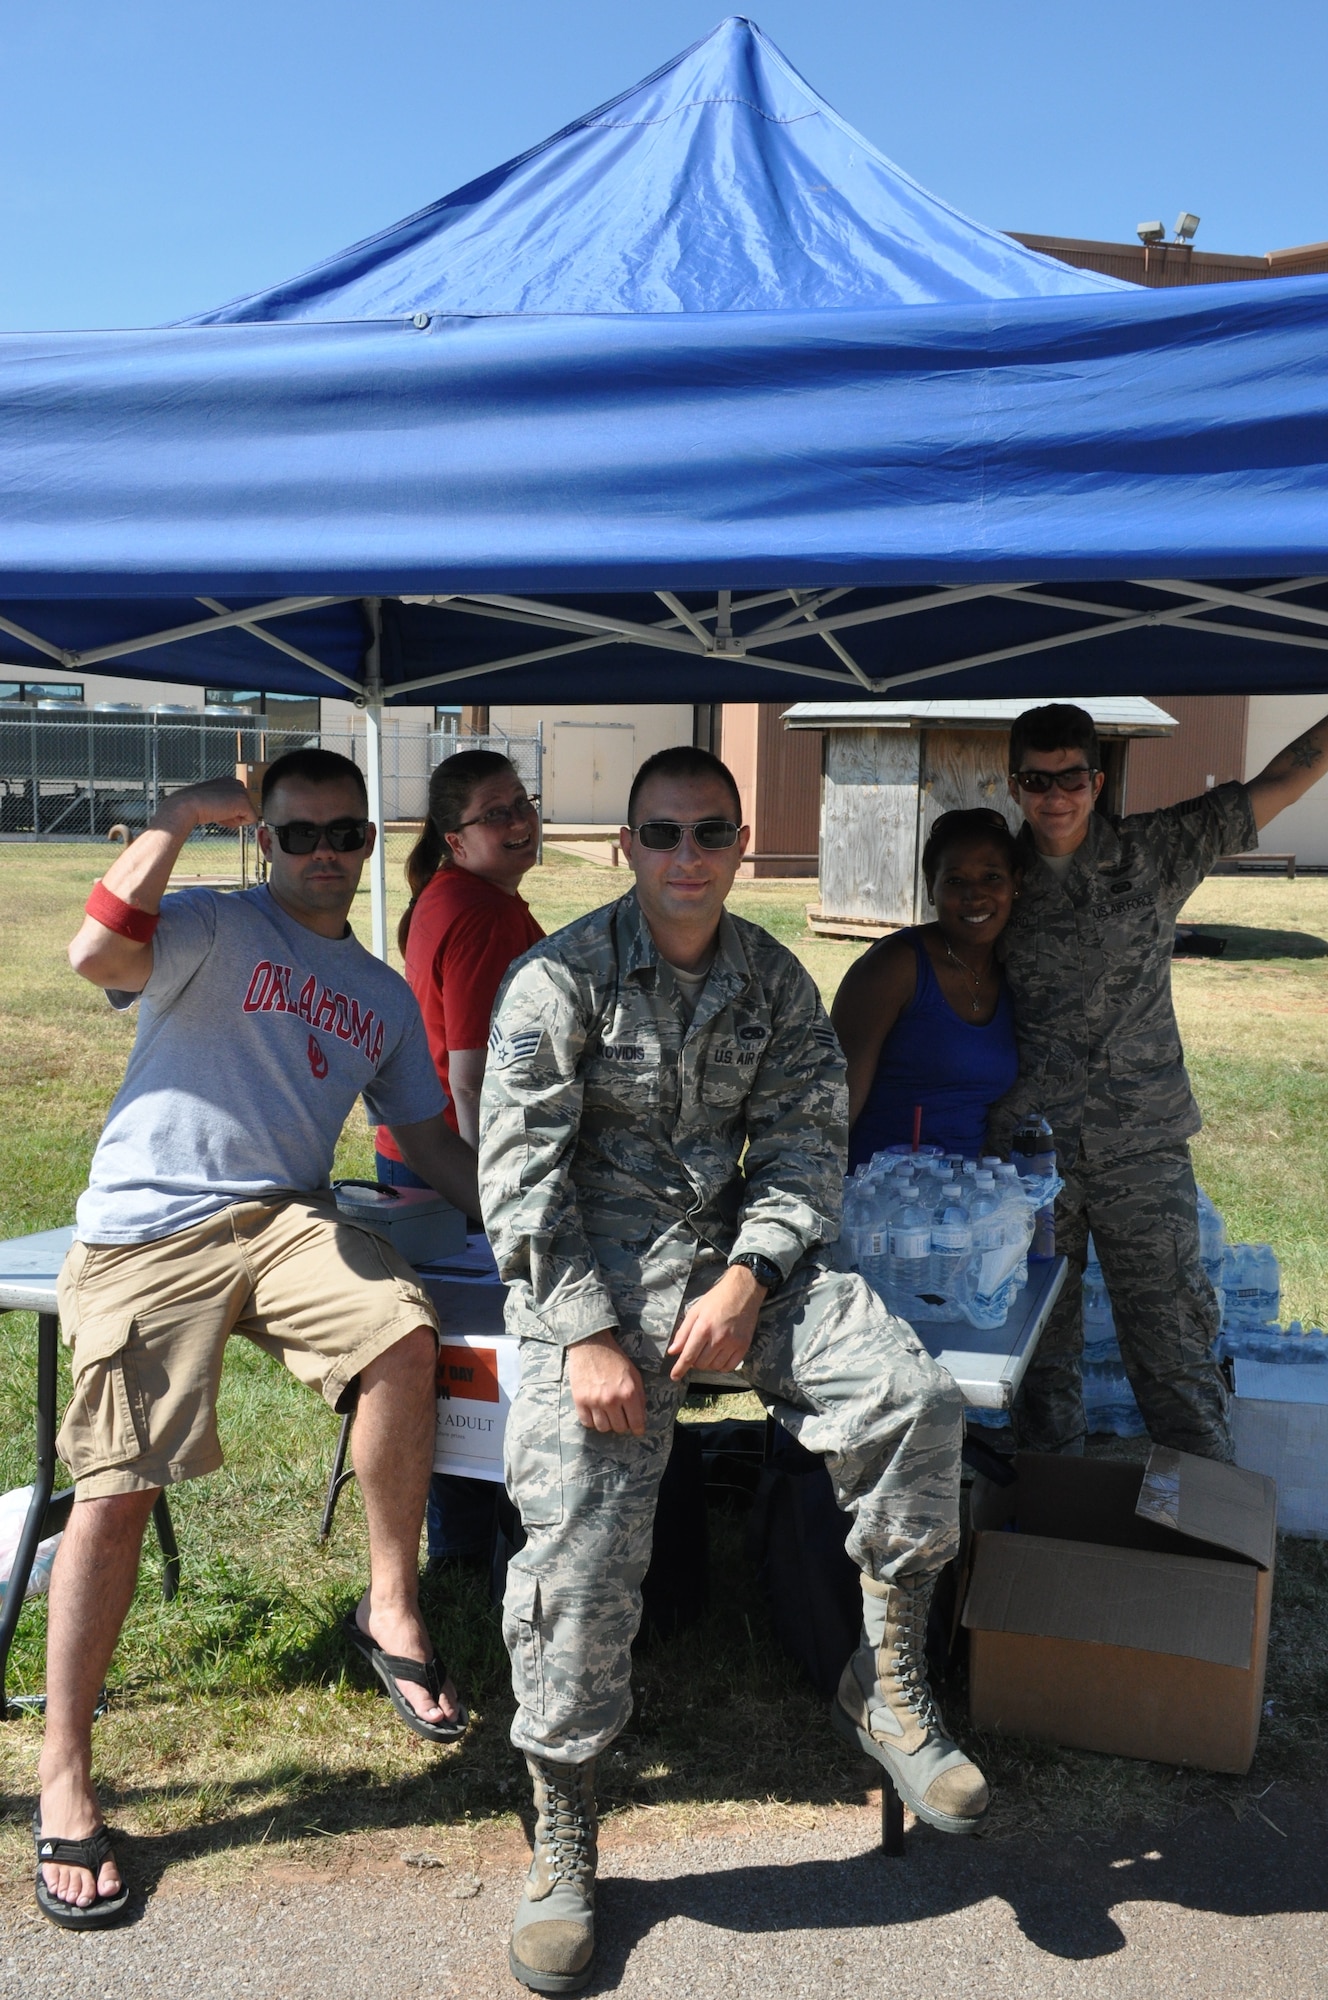 507th Air Refueling Wing members pose for a photo Sept. 12, 2015, at the 507th ARW Family Day celebration at Tinker Air Force Base, Okla. Each year, Reservists and their families are invited to the base for food, fun, and entertainment. (U.S. Air Force photo by Tech. Sgt. Lauren Gleason)